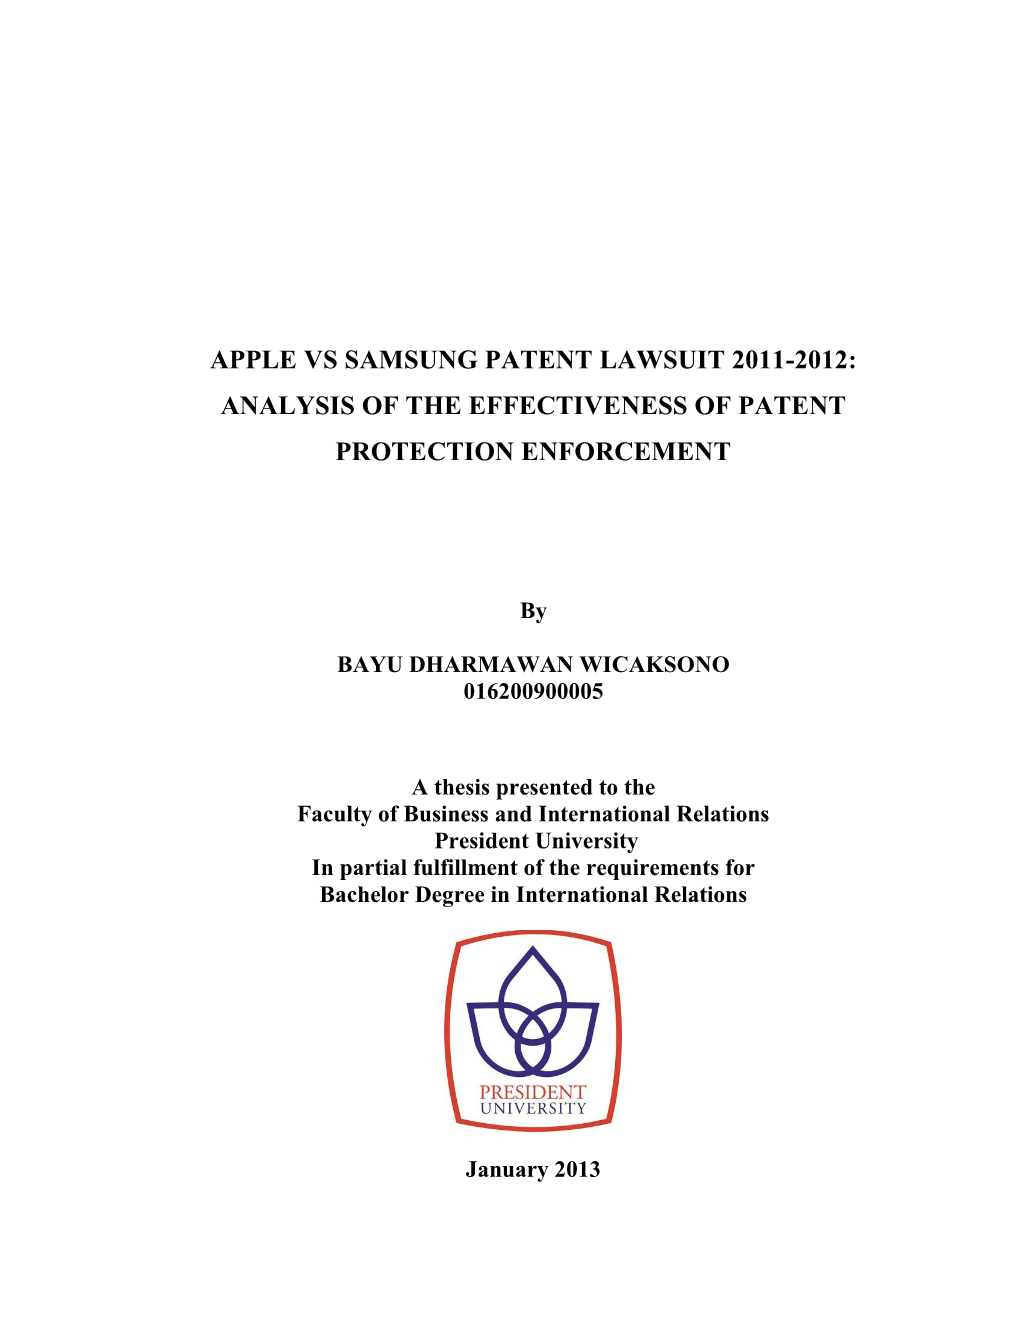 Apple Vs Samsung Patent Lawsuit 2011-2012: Analysis of the Effectiveness of Patent Protection Enforcement